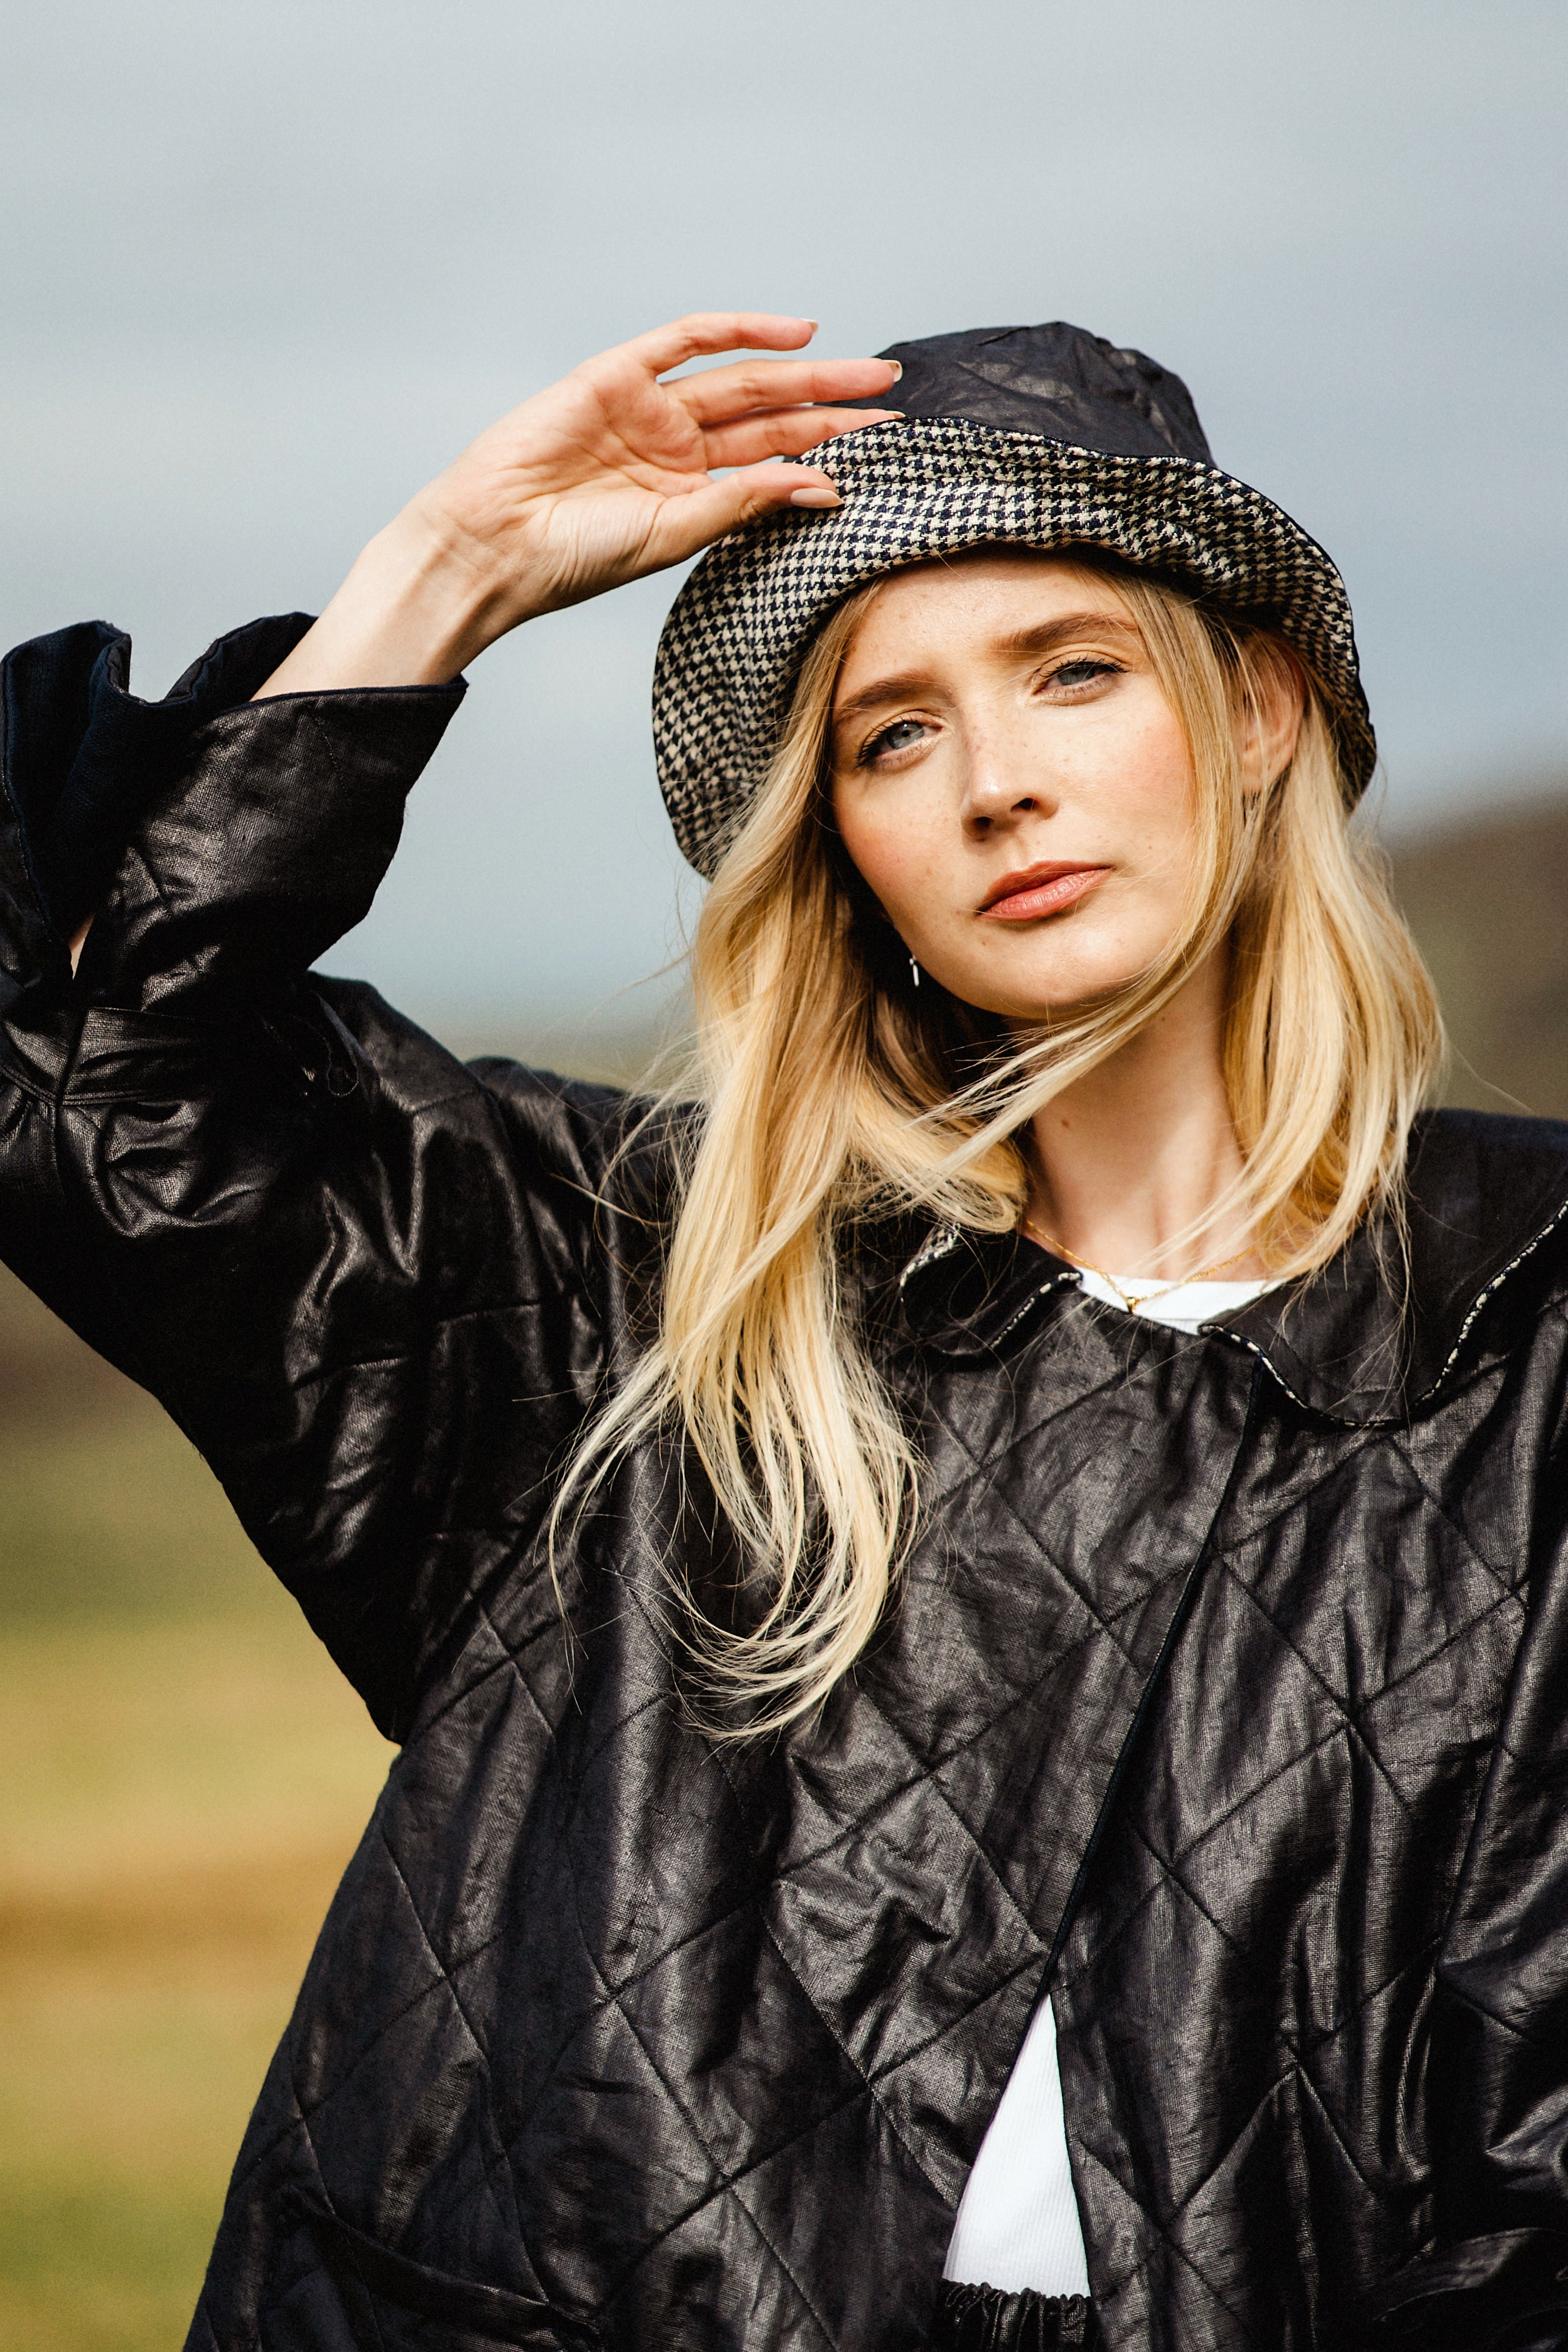 HlLLSBOROUGH HAT | For the days of long walks and good sea air. Inspired by Amy’s (our designer) favourite forest walks, the black beetled linen is contrasted vintage houndstooth irish linen made with Irish grown flax. Made to shield your sweet face from